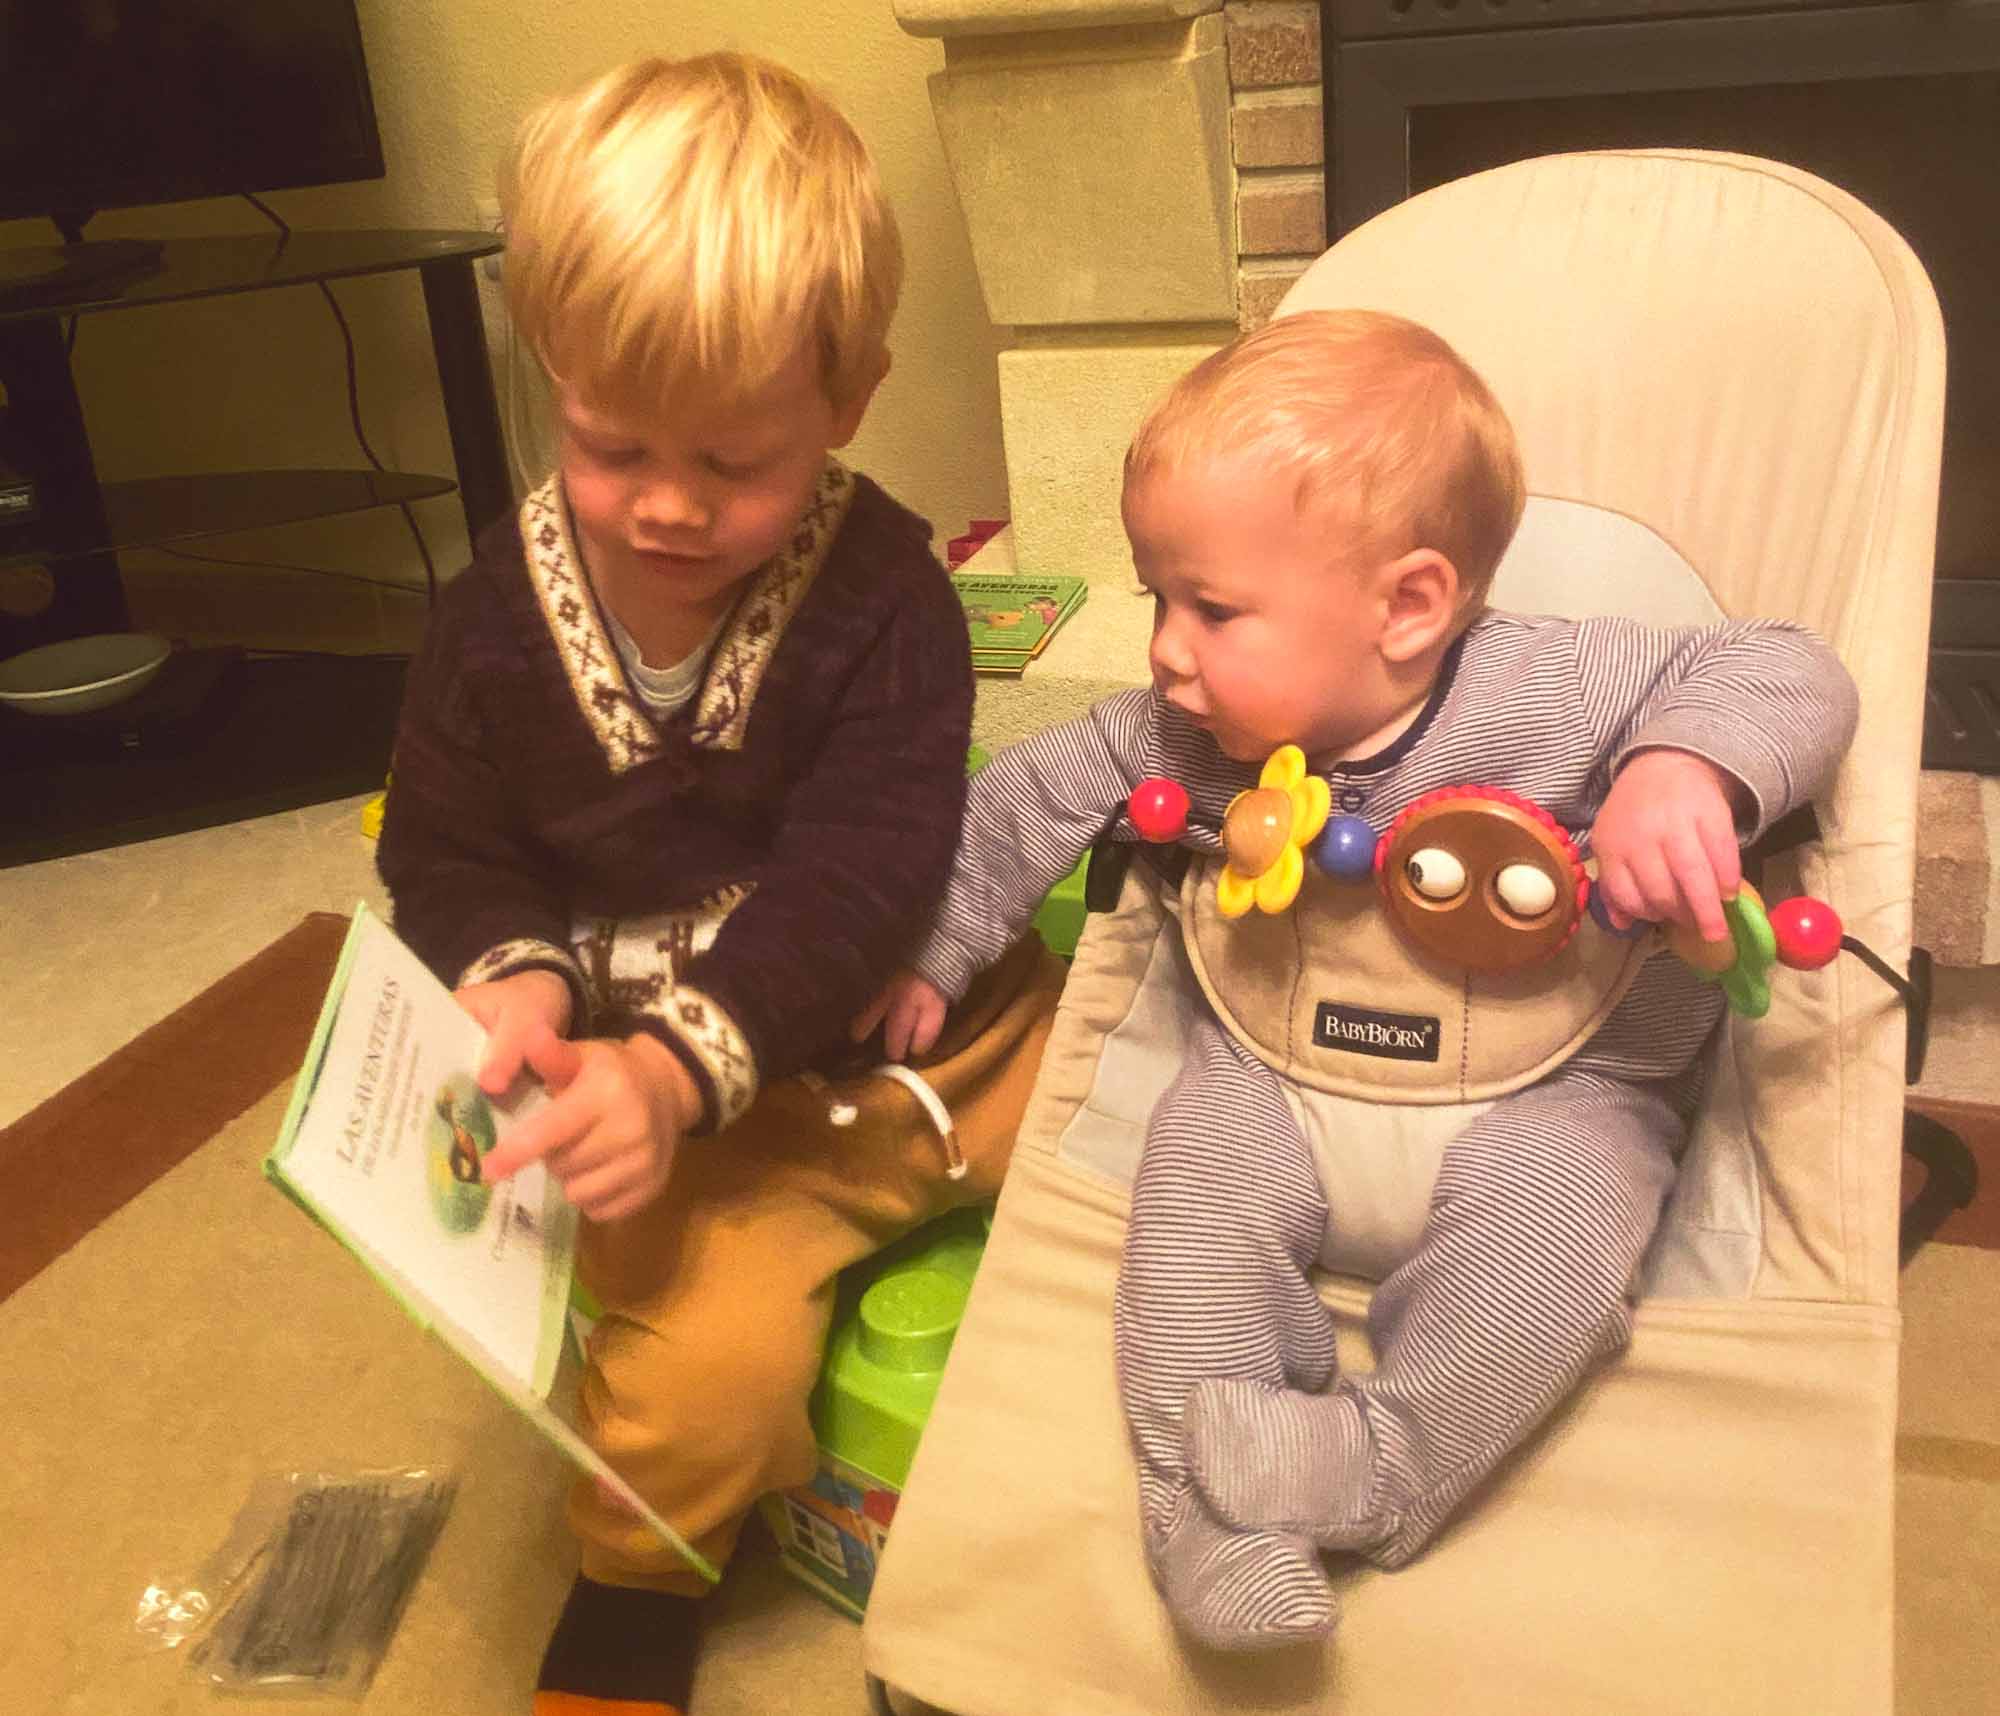 Young boy showing a book to his baby brother sat in a bouncy chair